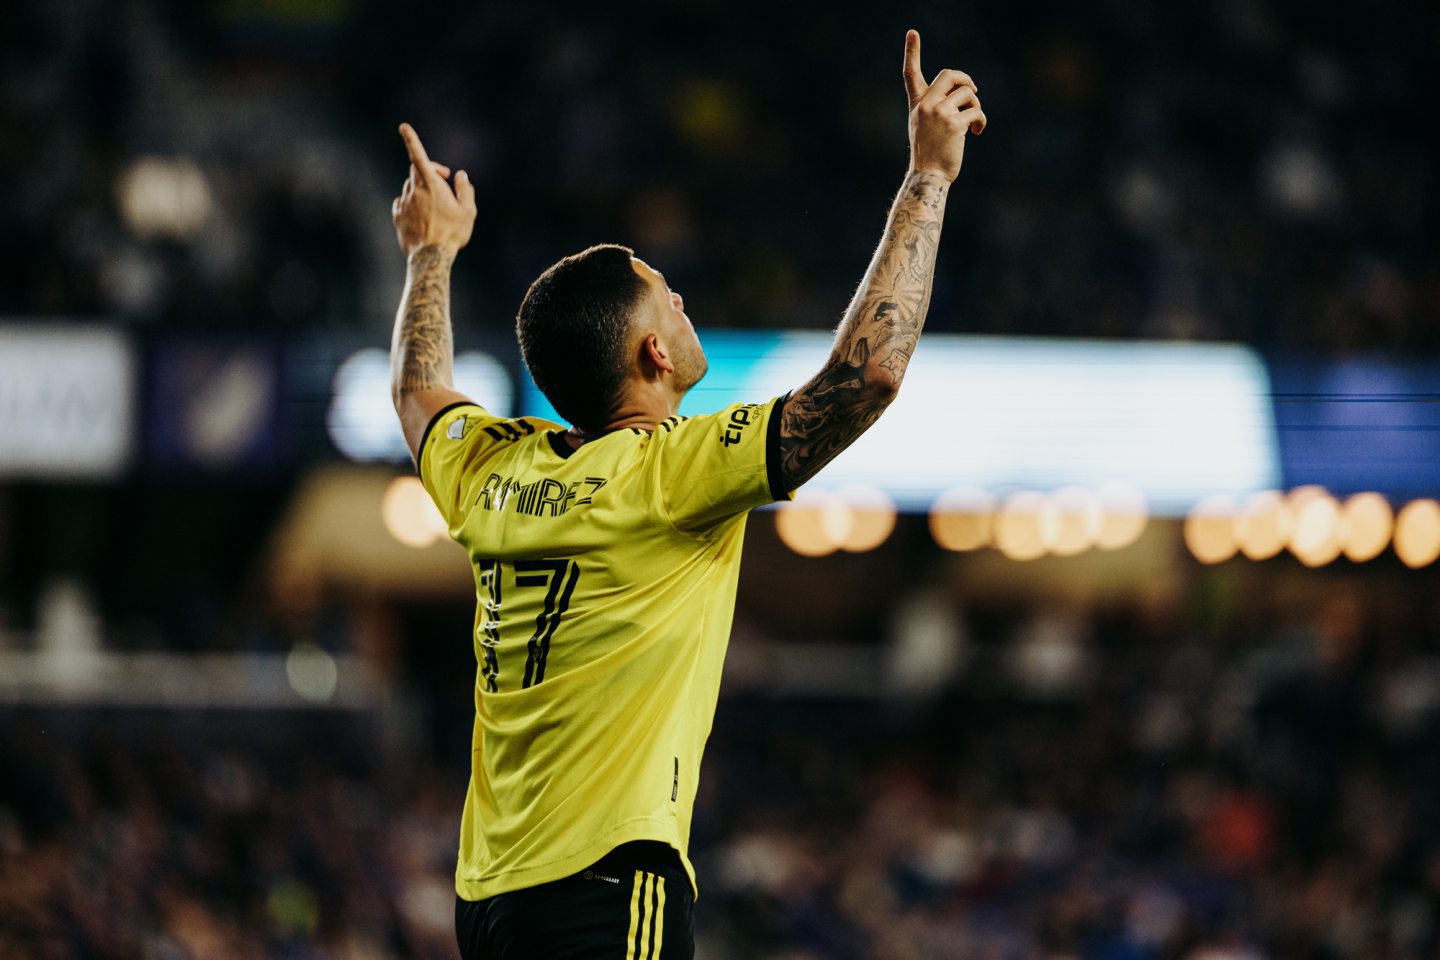 Former Aberdeen striker Christian Ramirez celebrates winning the MLS Cup final with Columbus Crew. Image supplied by Columbus Crew FC